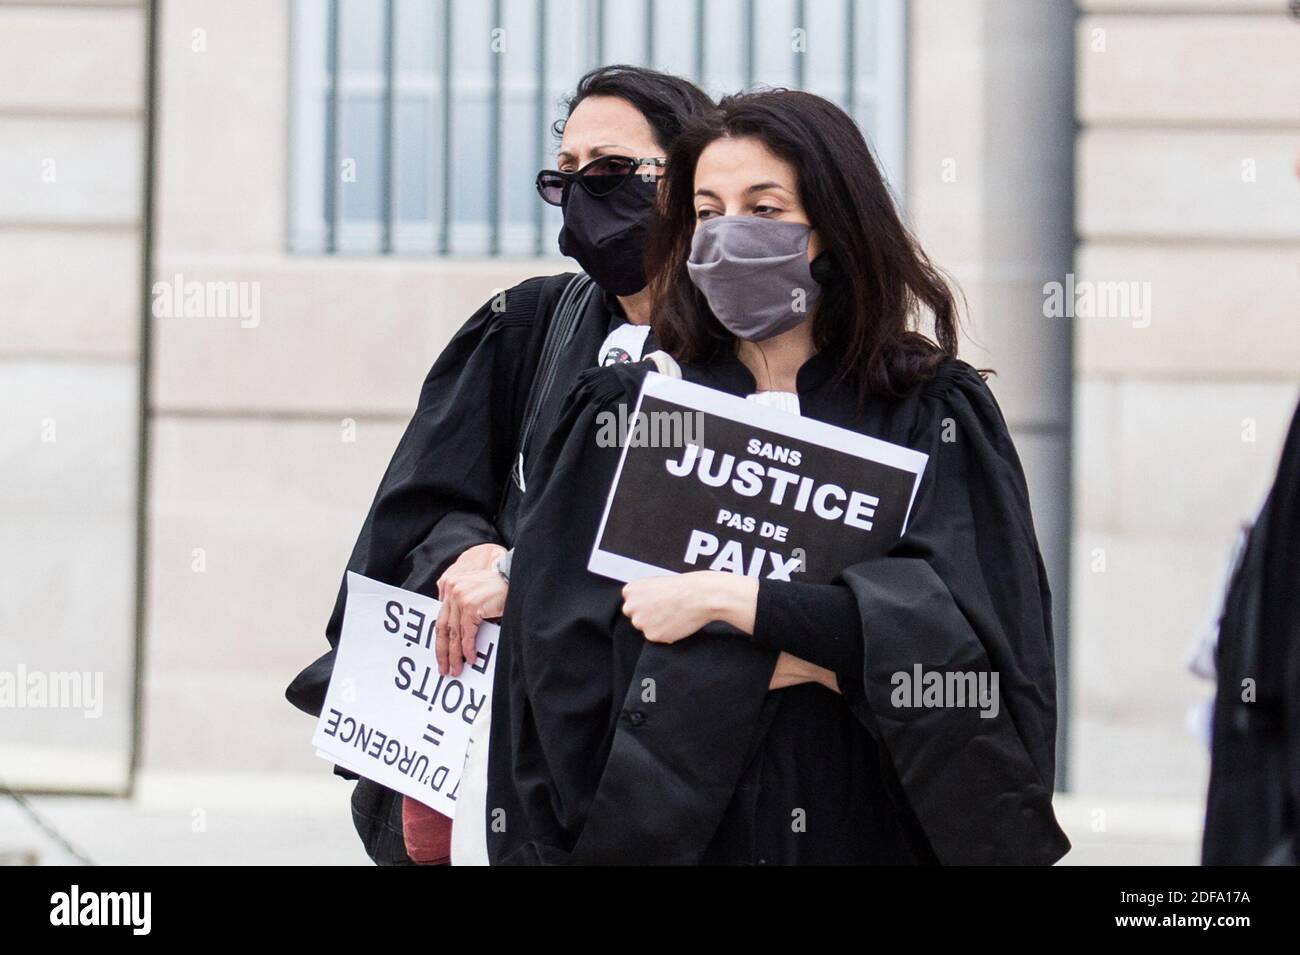 Coronavirus - - After lockdown day - Lawyers for the Black Robe Brigade demonstrate outside the Ministry of Justice to defend the freedoms and principles of our rule of law